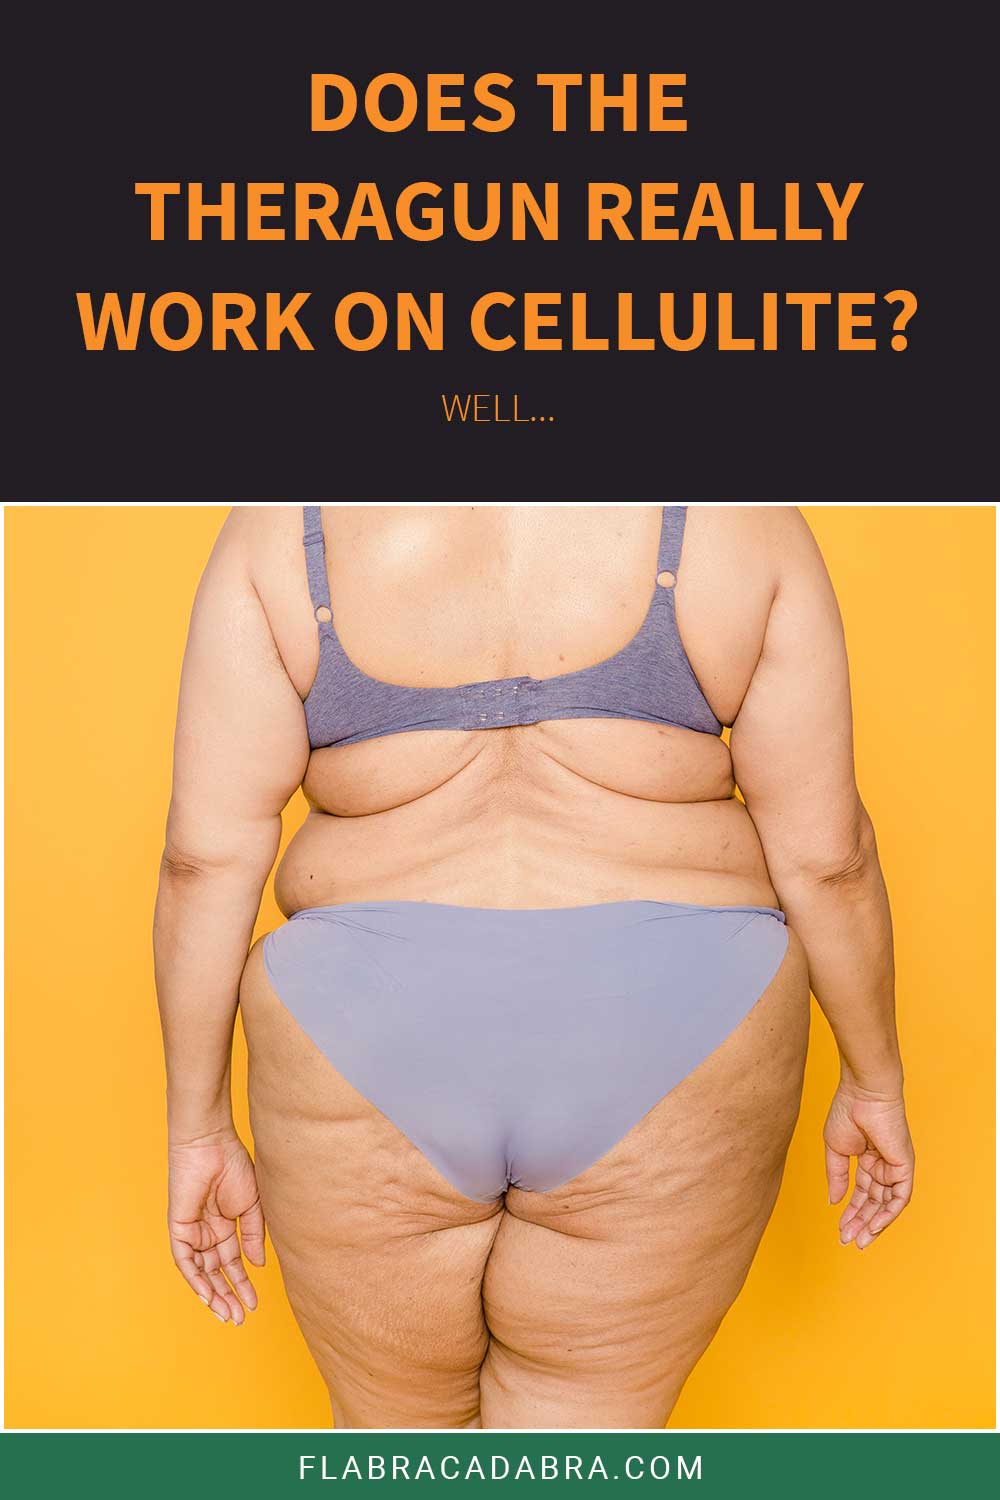 Does the Theragun Really Work on Cellulite? Well…